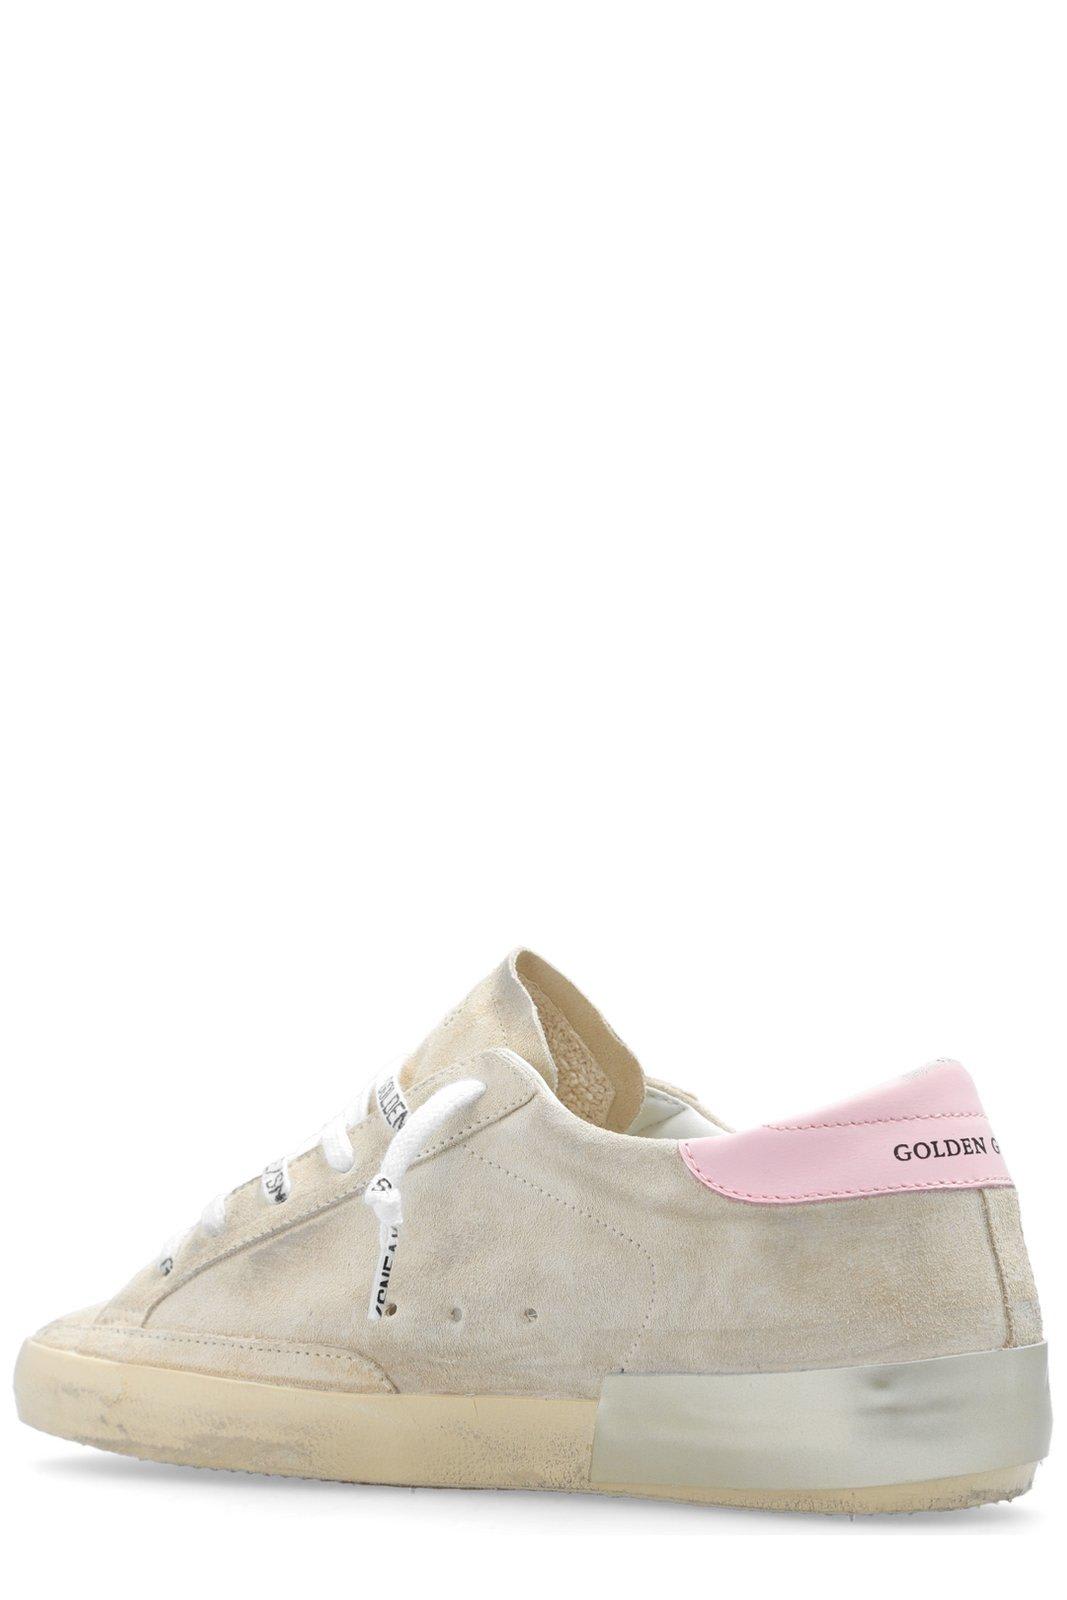 Shop Golden Goose Super-star Classic Sneakers In Butter Brown Orchid Pink